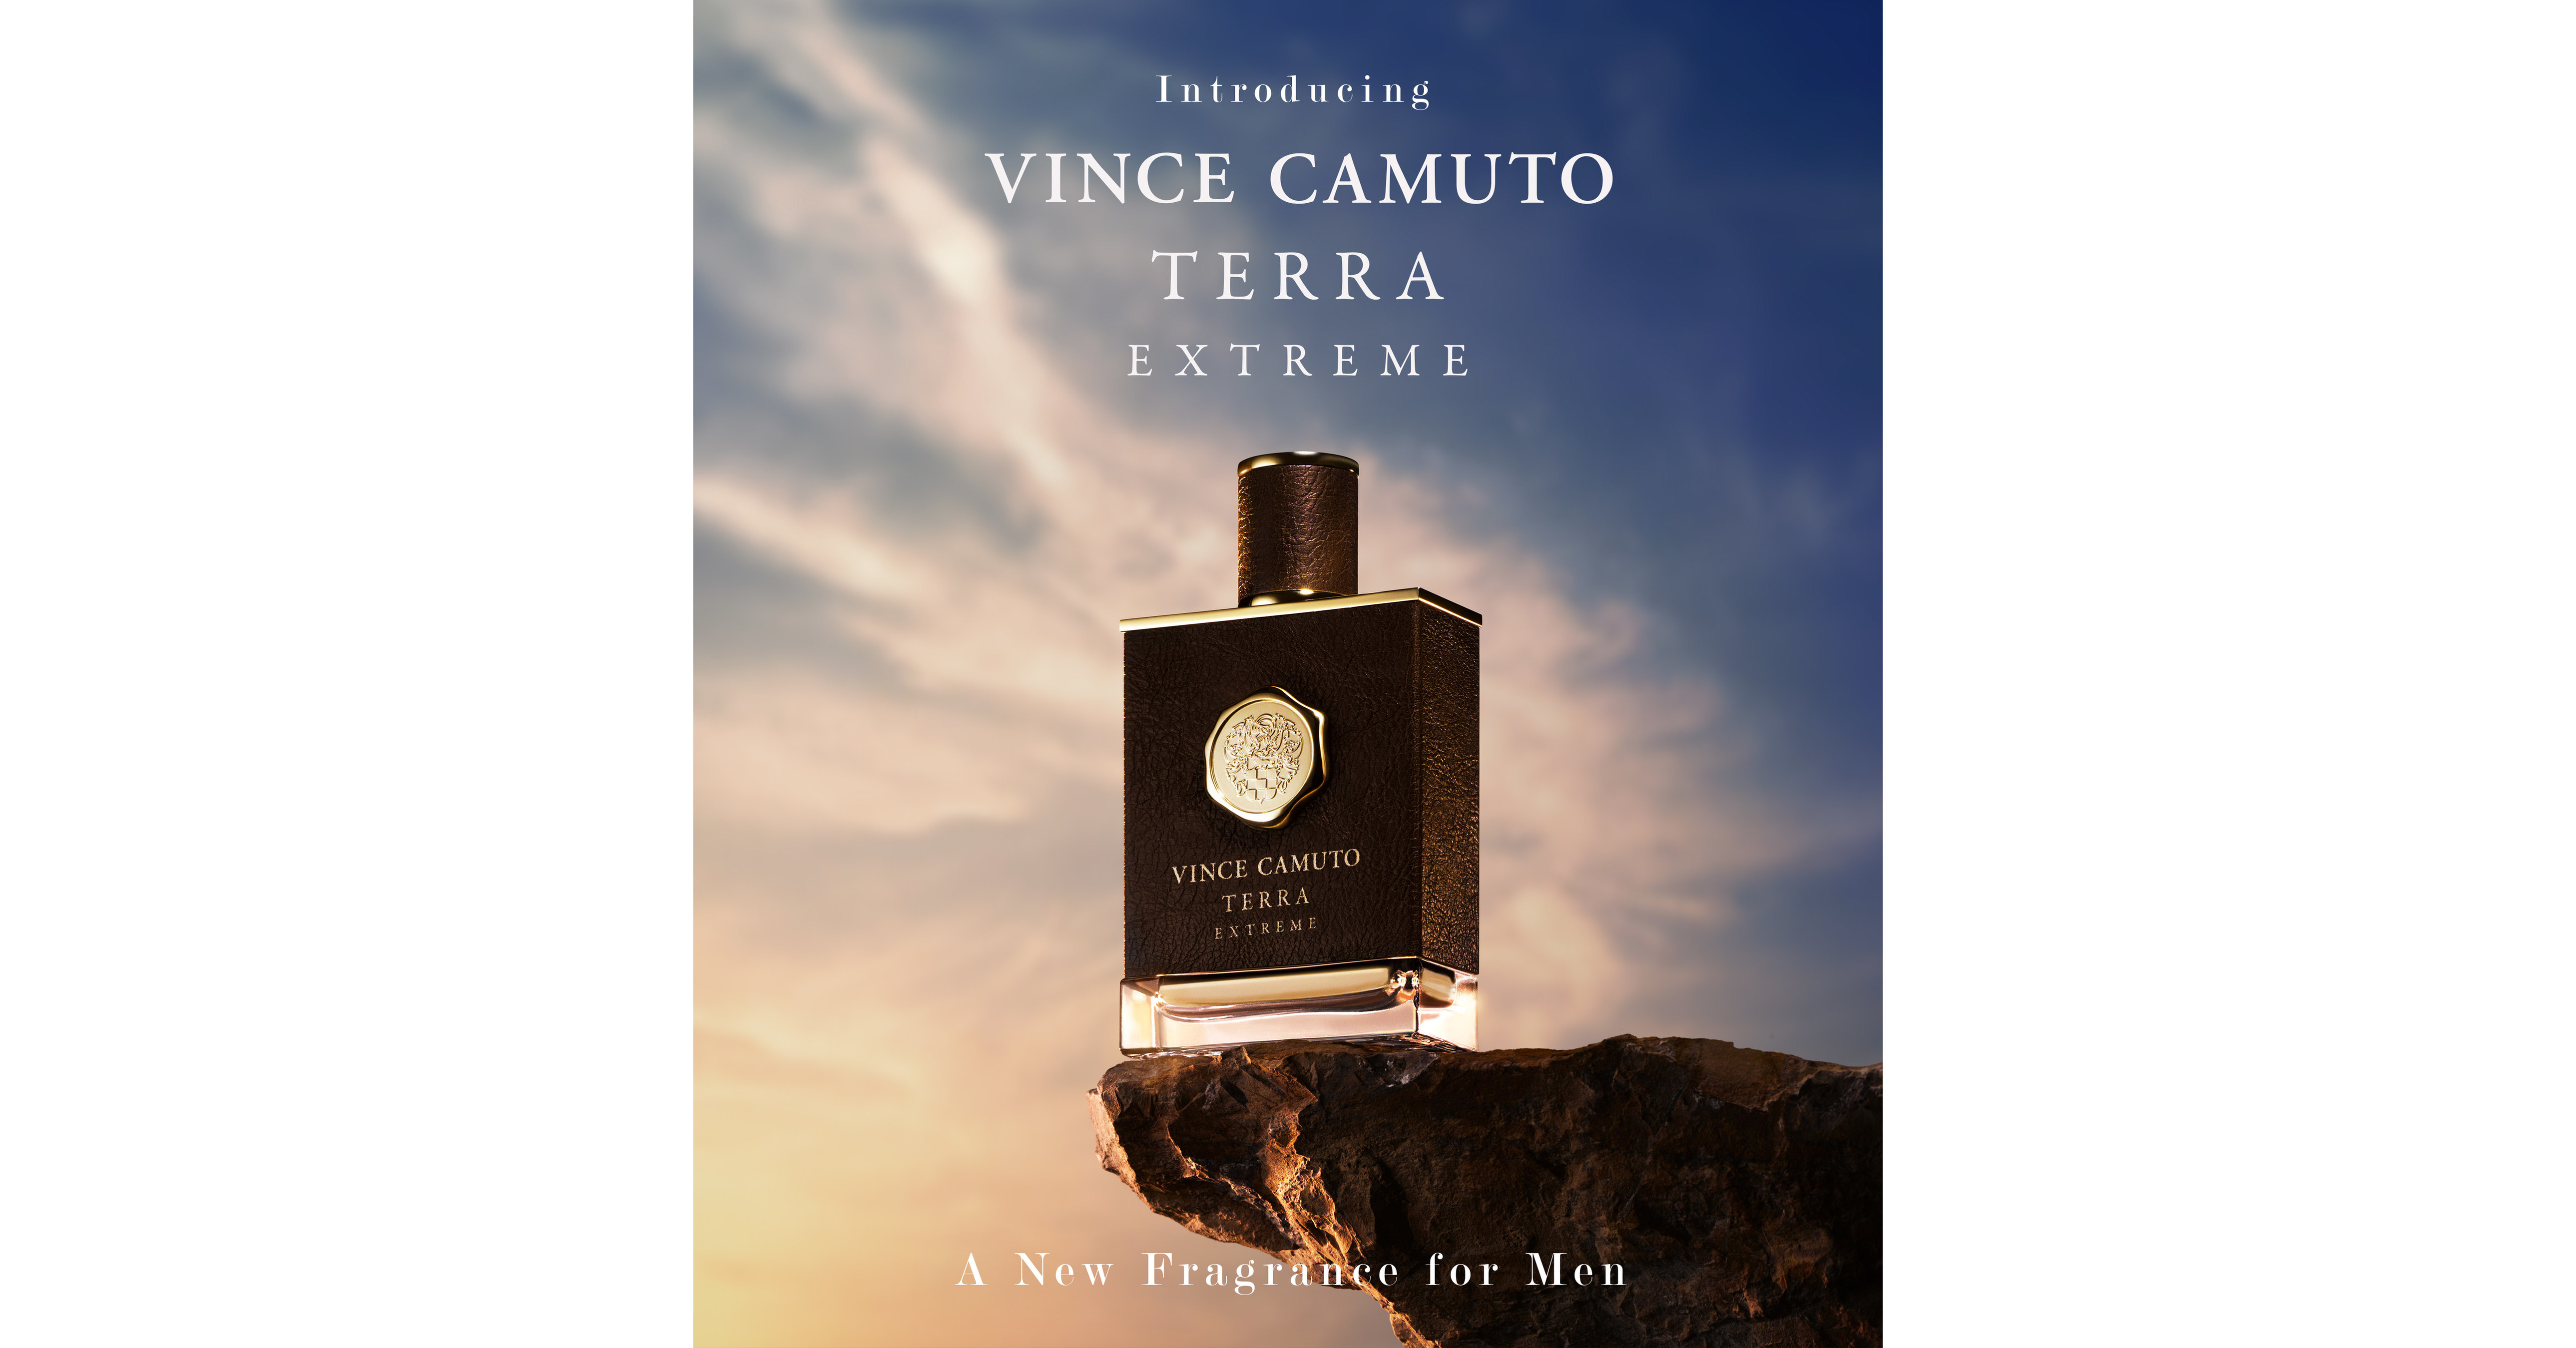 Vince Camuto Terra by Vince Camuto 3.4 oz EDT for Men